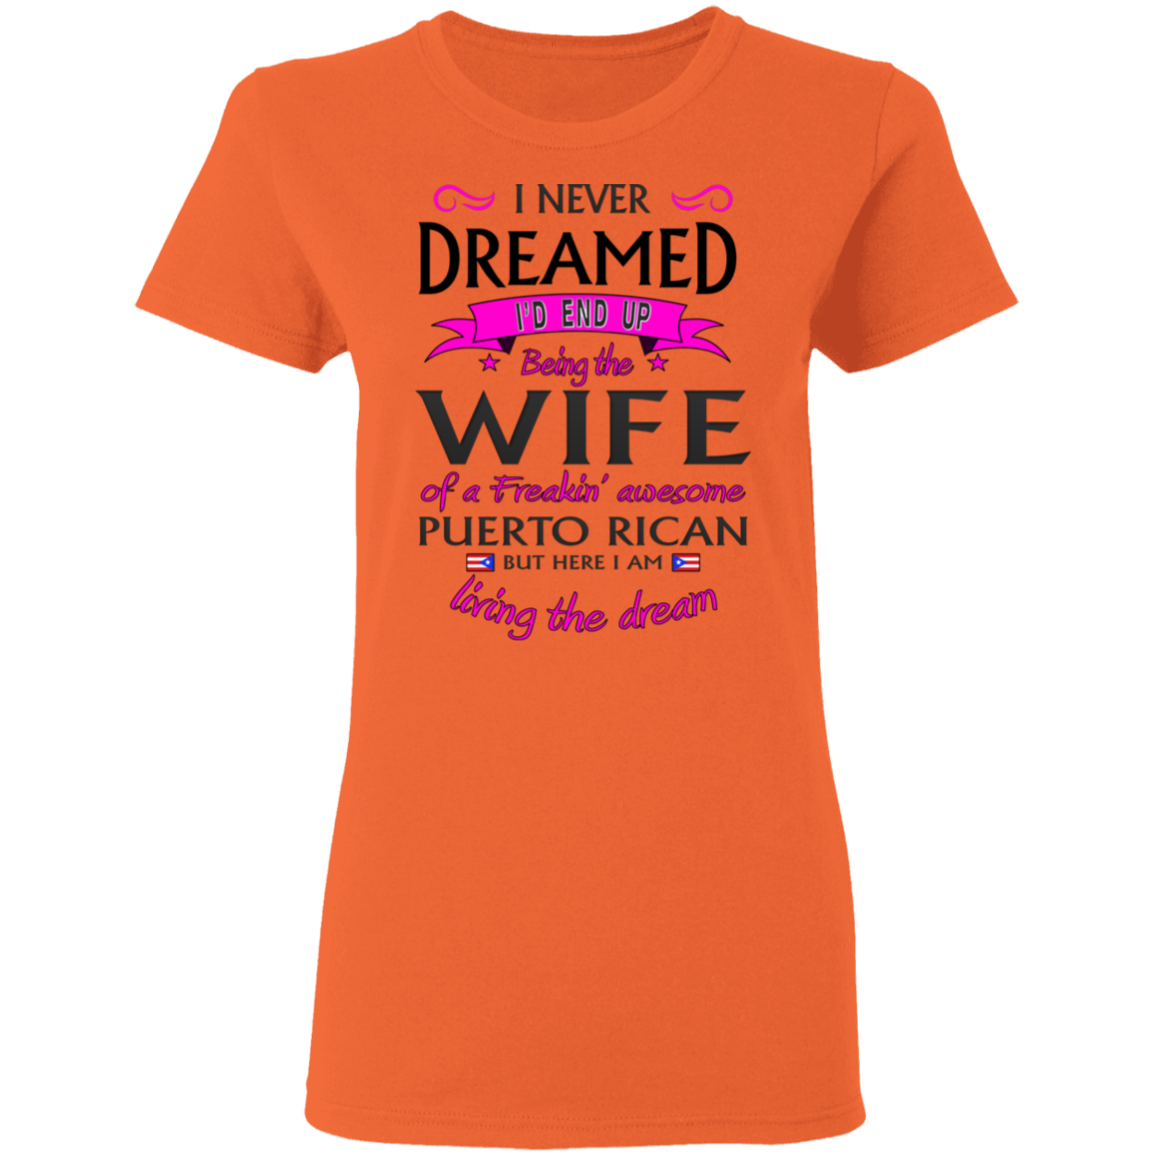 Wife of Awesome PR 5.3 oz. T-Shirt - Puerto Rican Pride